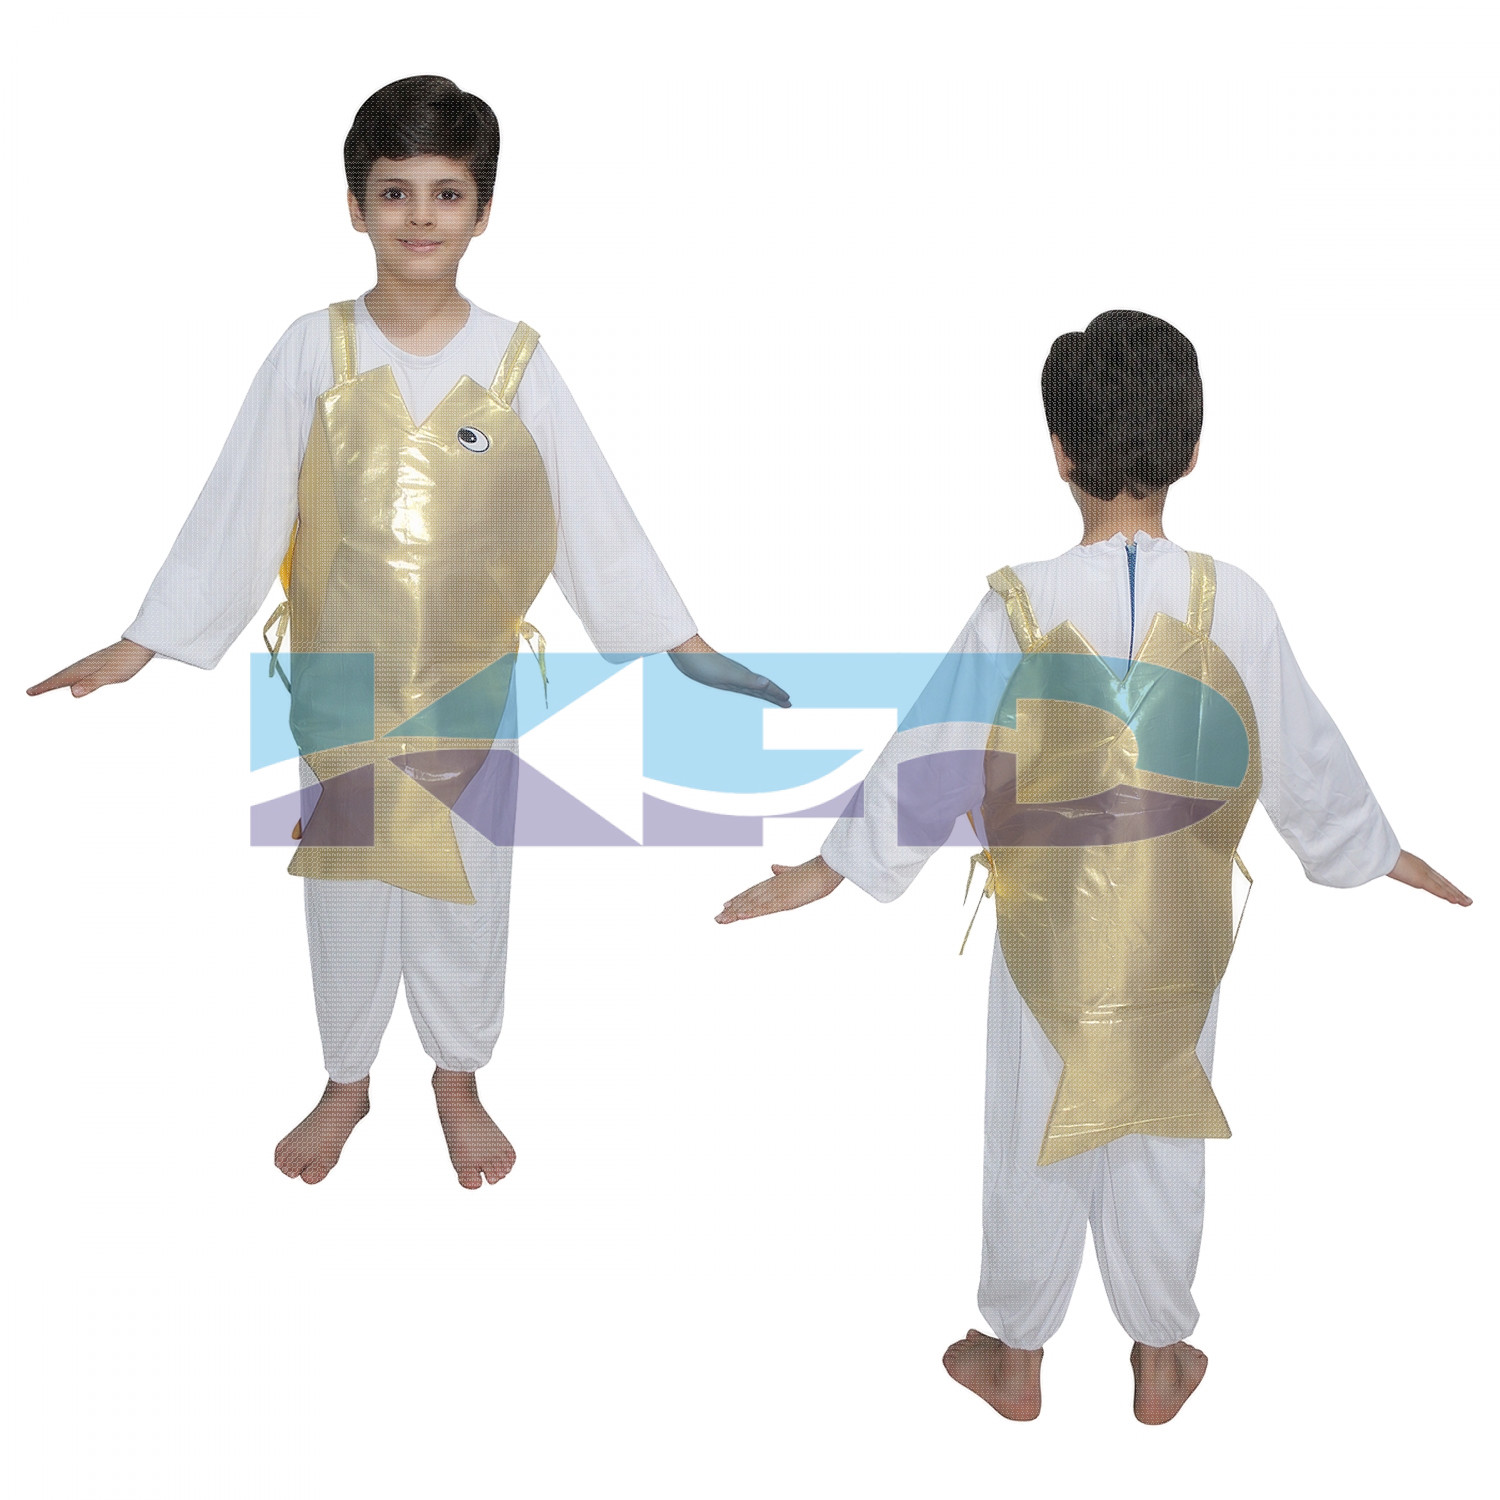 Golden Fish fancy dress for kids,Insect Costume for School Annual function/Theme Party/Competition/Stage Shows Dress